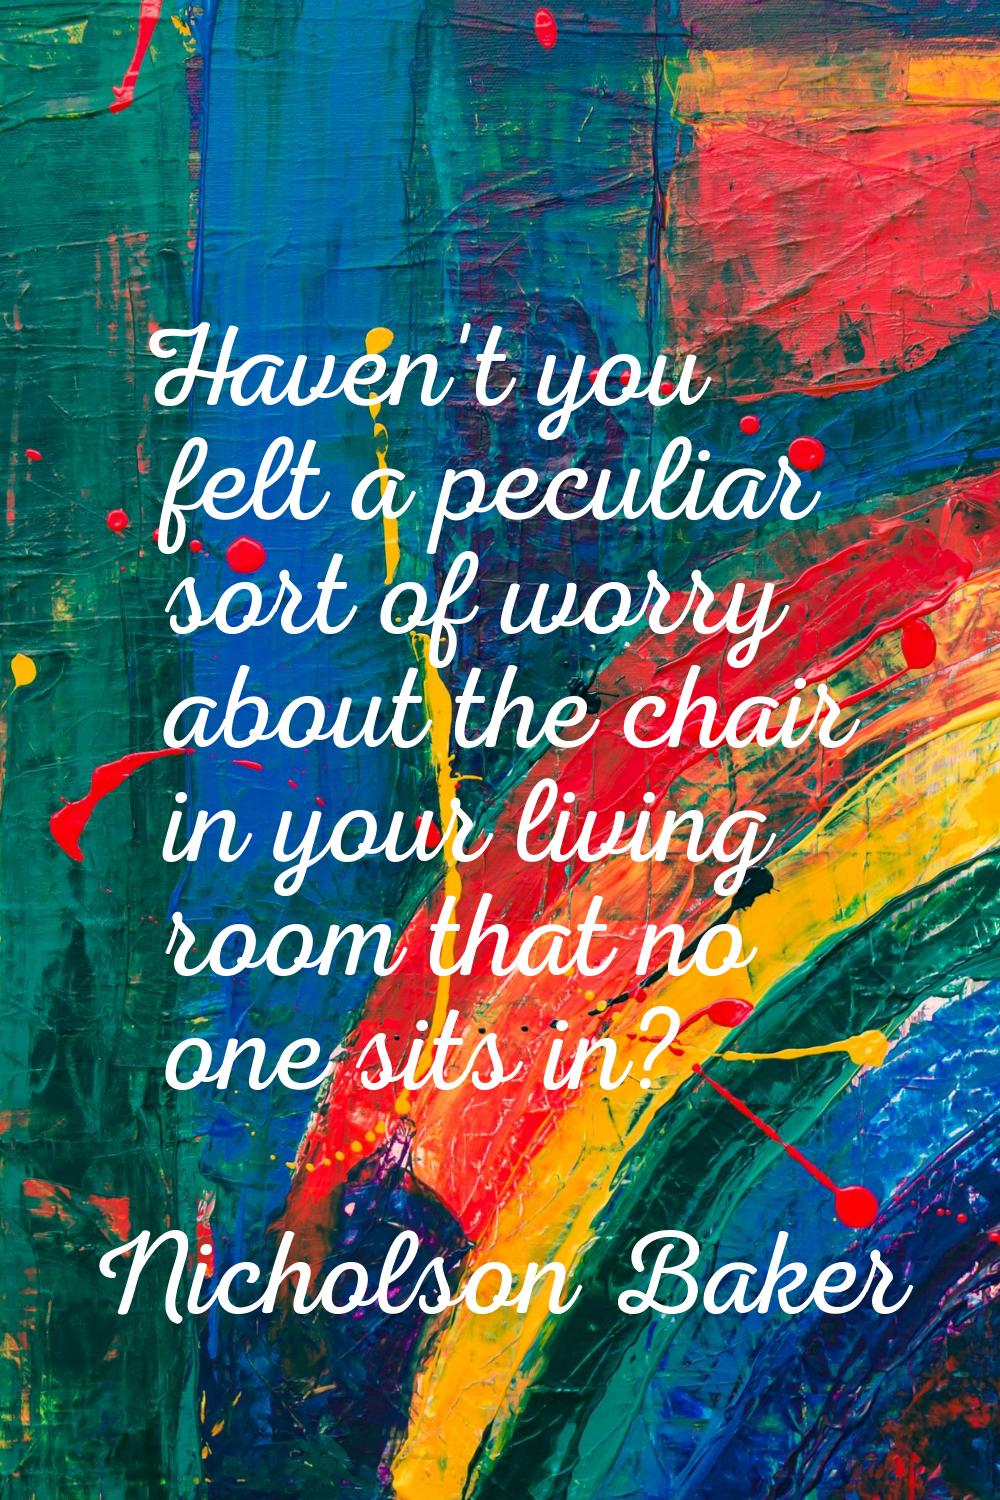 Haven't you felt a peculiar sort of worry about the chair in your living room that no one sits in?